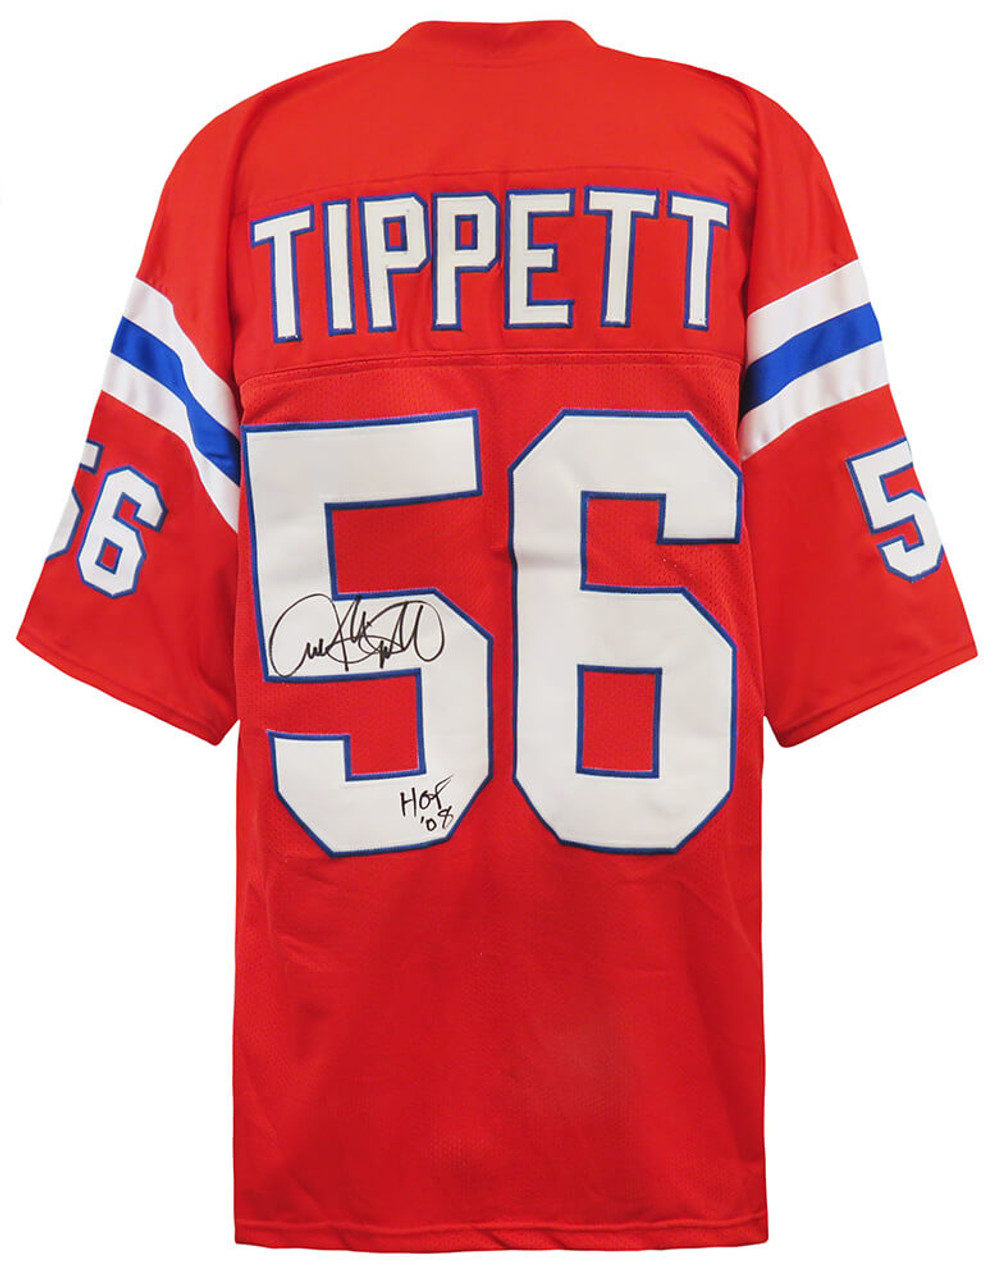 New England Patriots Andre Tippett Signed Red Throwback Jersey w/HOF'08 -  Schwartz Authenticated